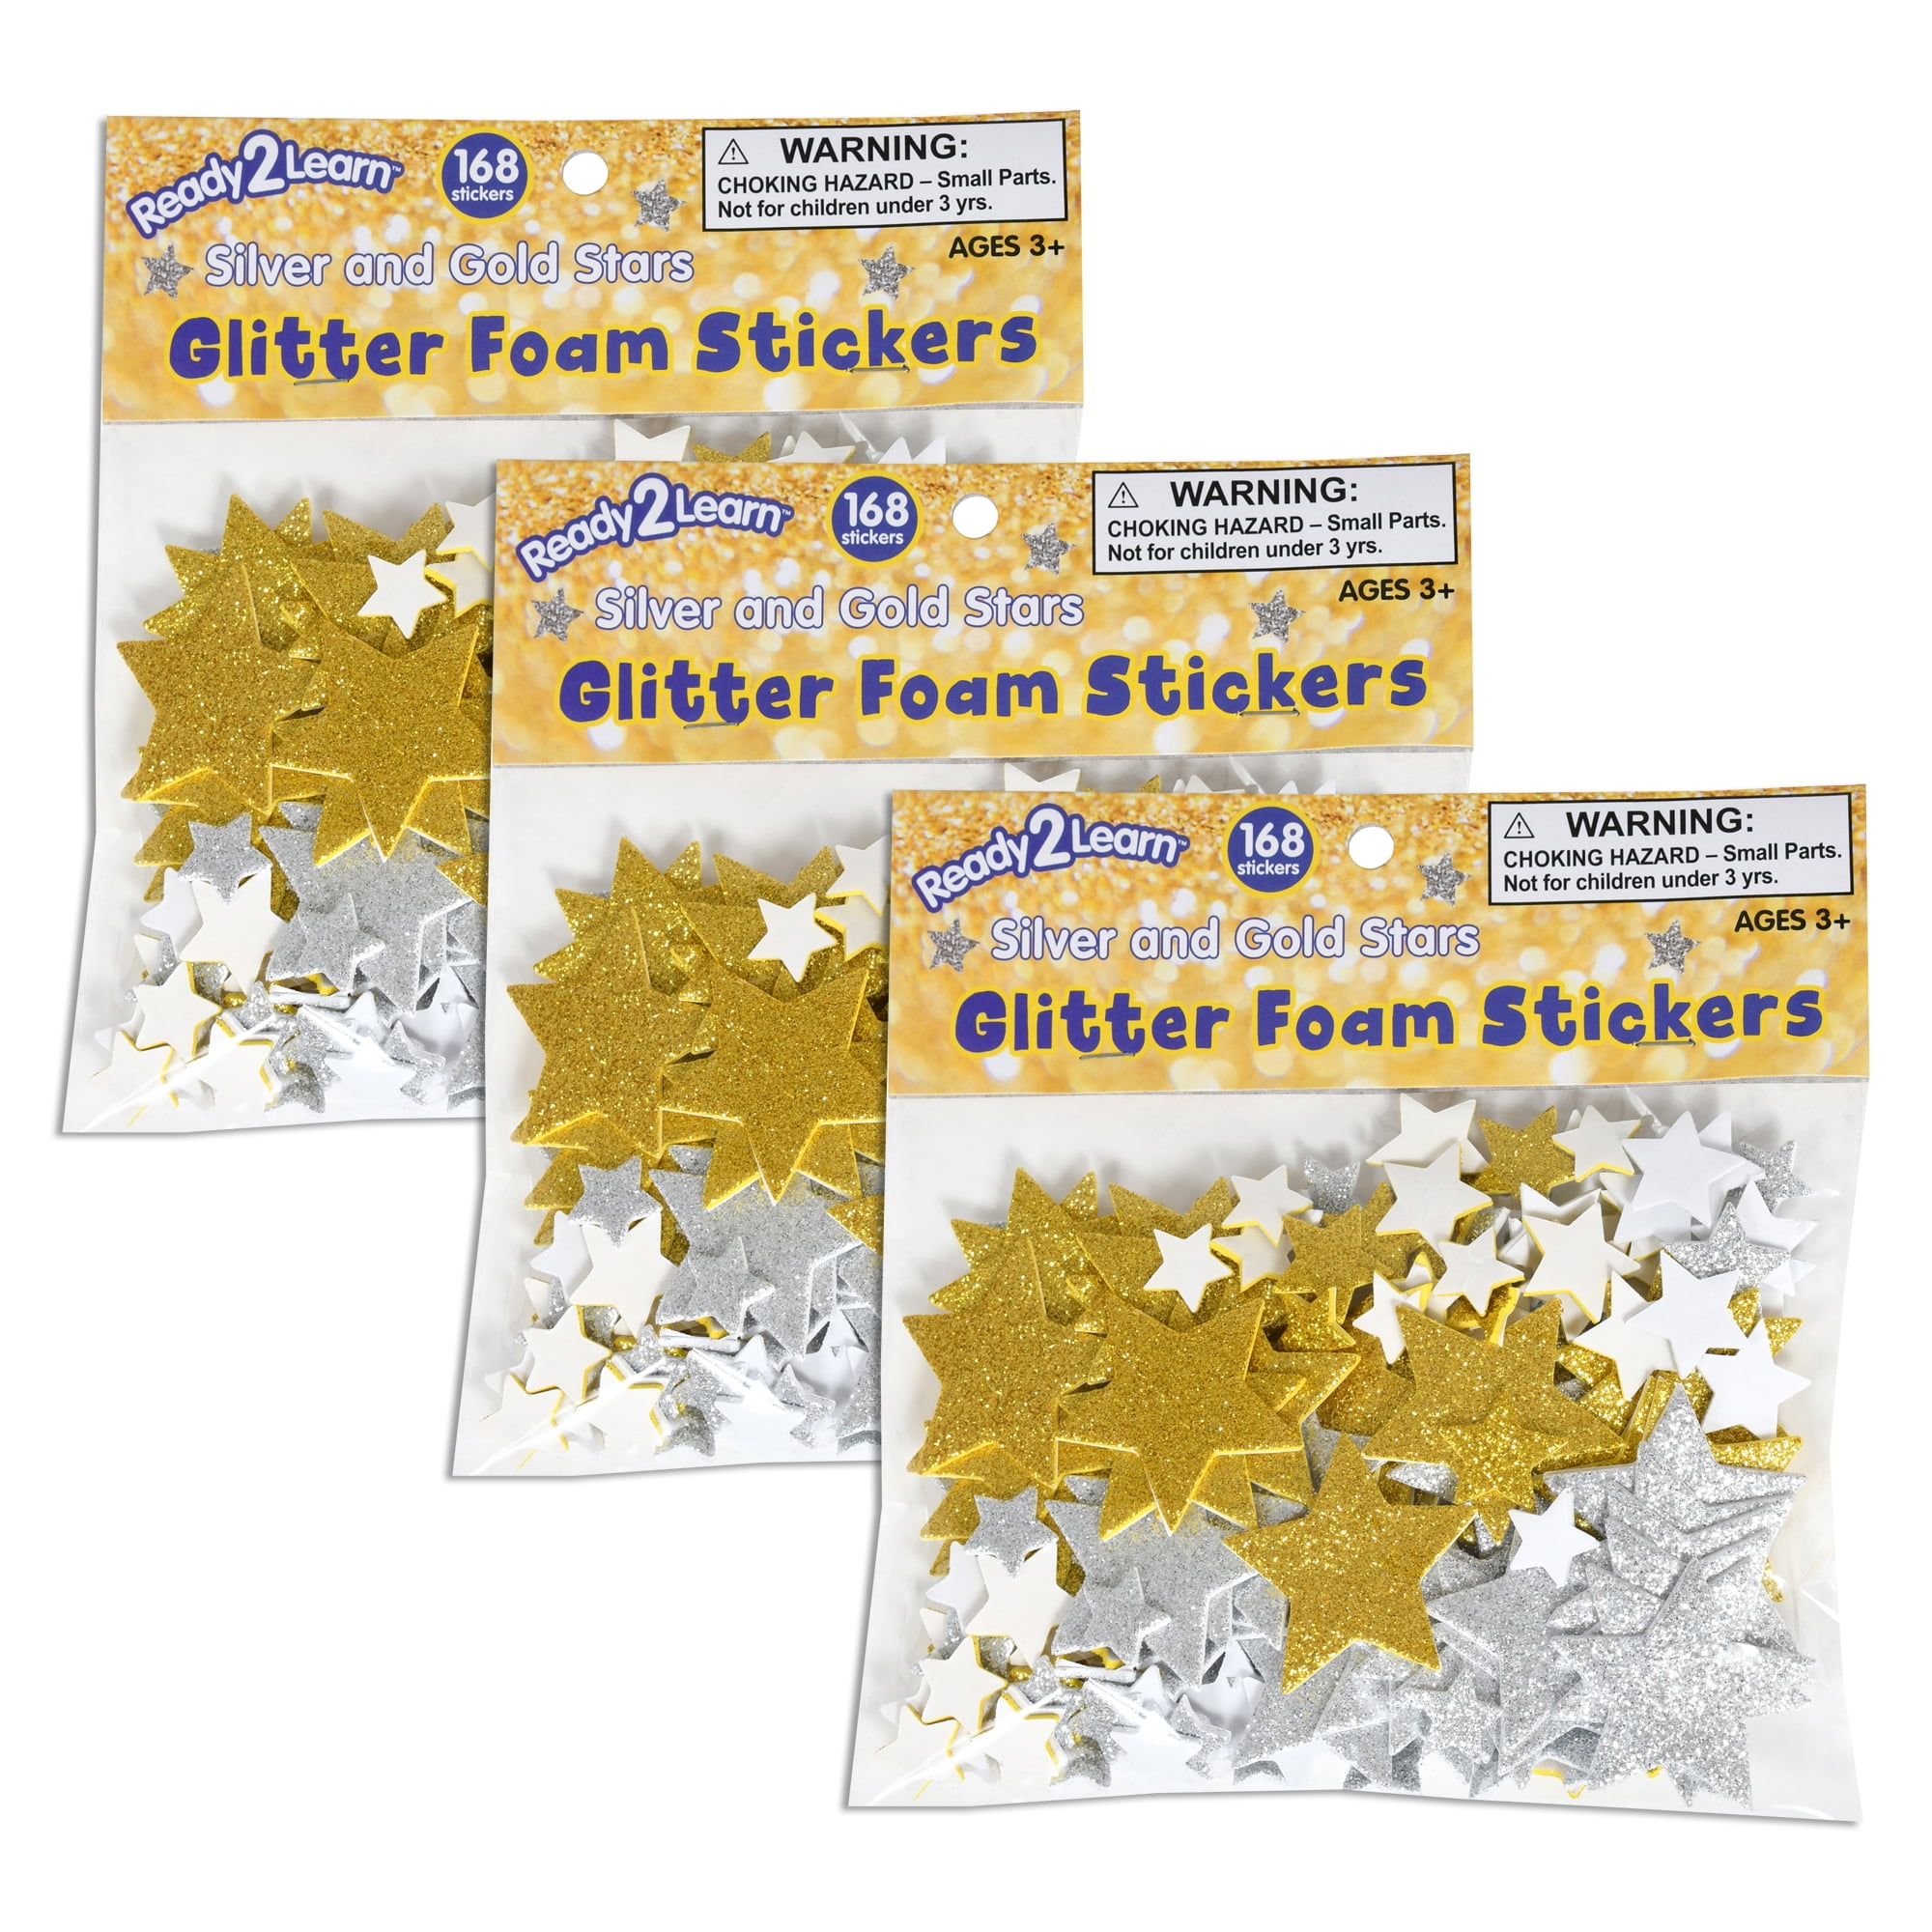 Ready 2 Learn Glitter Foam Stickers - Stars - Silver and Gold, 168 per Pack, 3 Packs